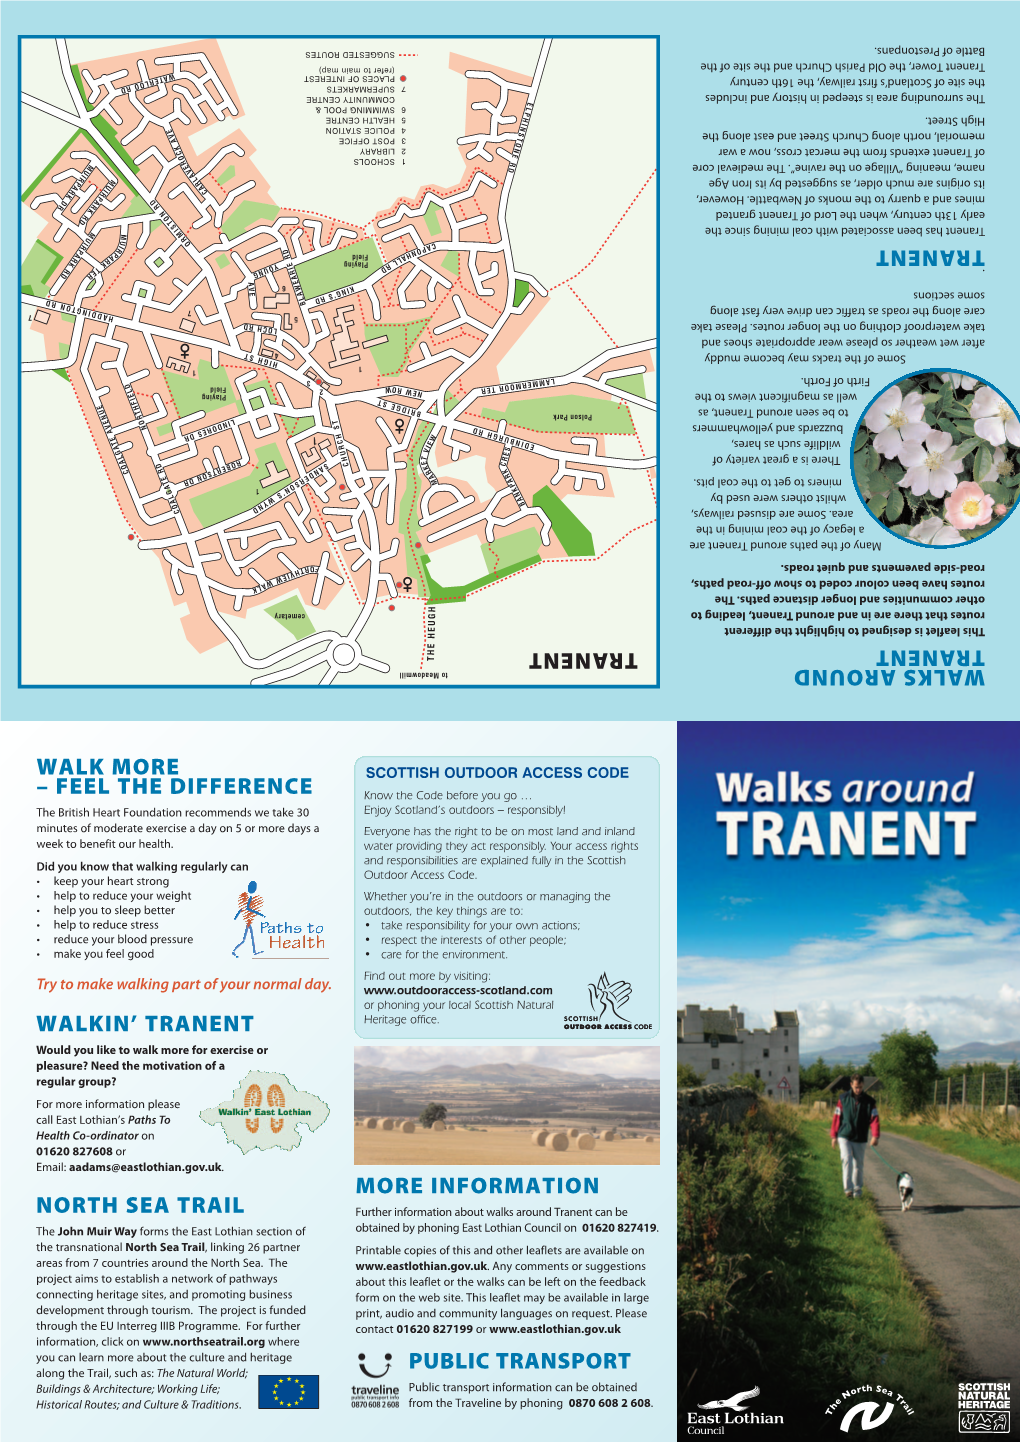 Tranent Can Be Can Tranent Around Walks About Information Further NORTH SEA TRAIL SEA NORTH